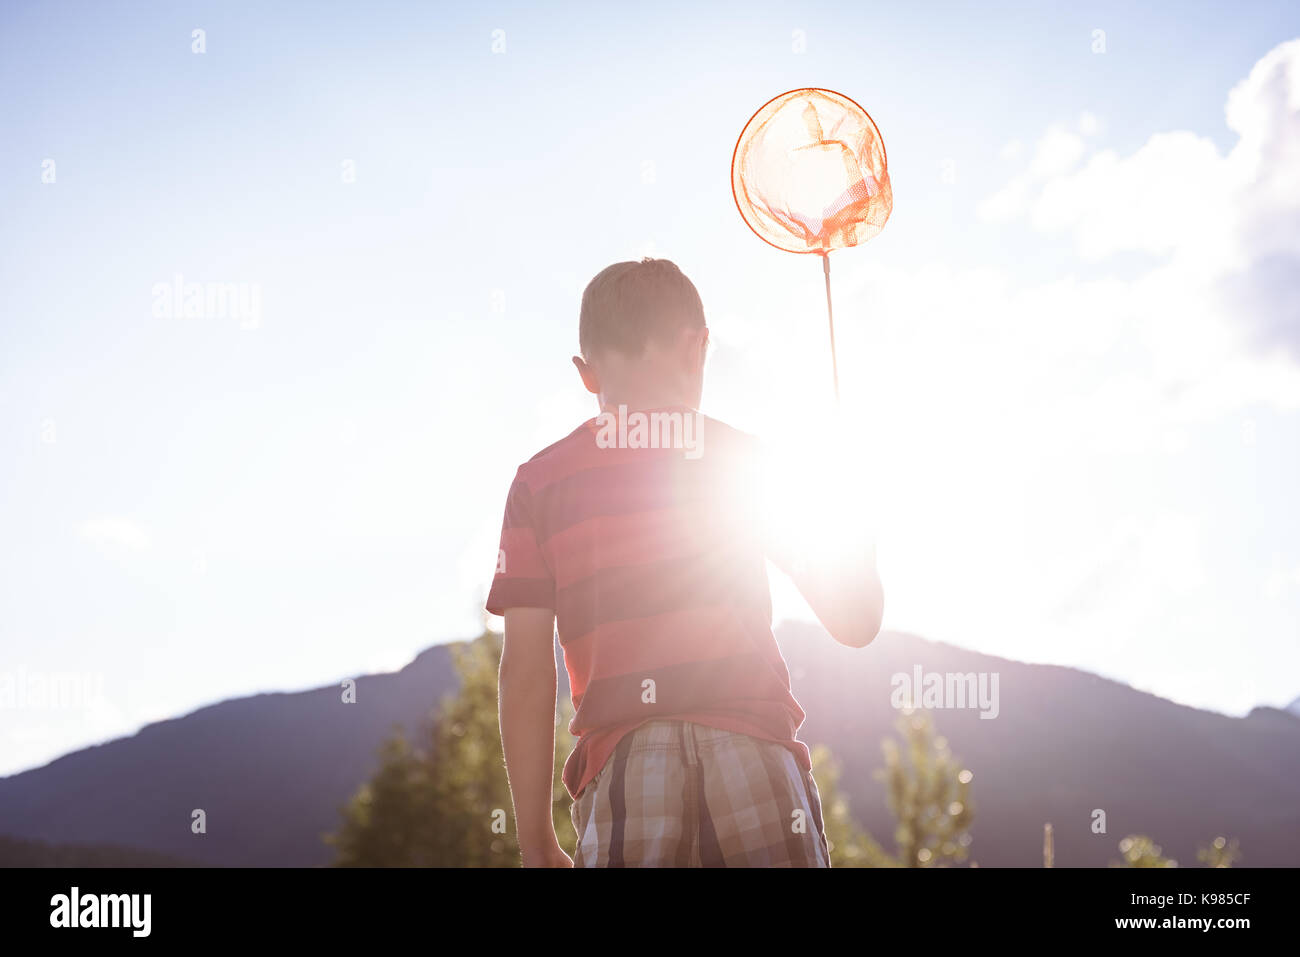 Rear view of boy holding butterfly net on a sunny day Stock Photo